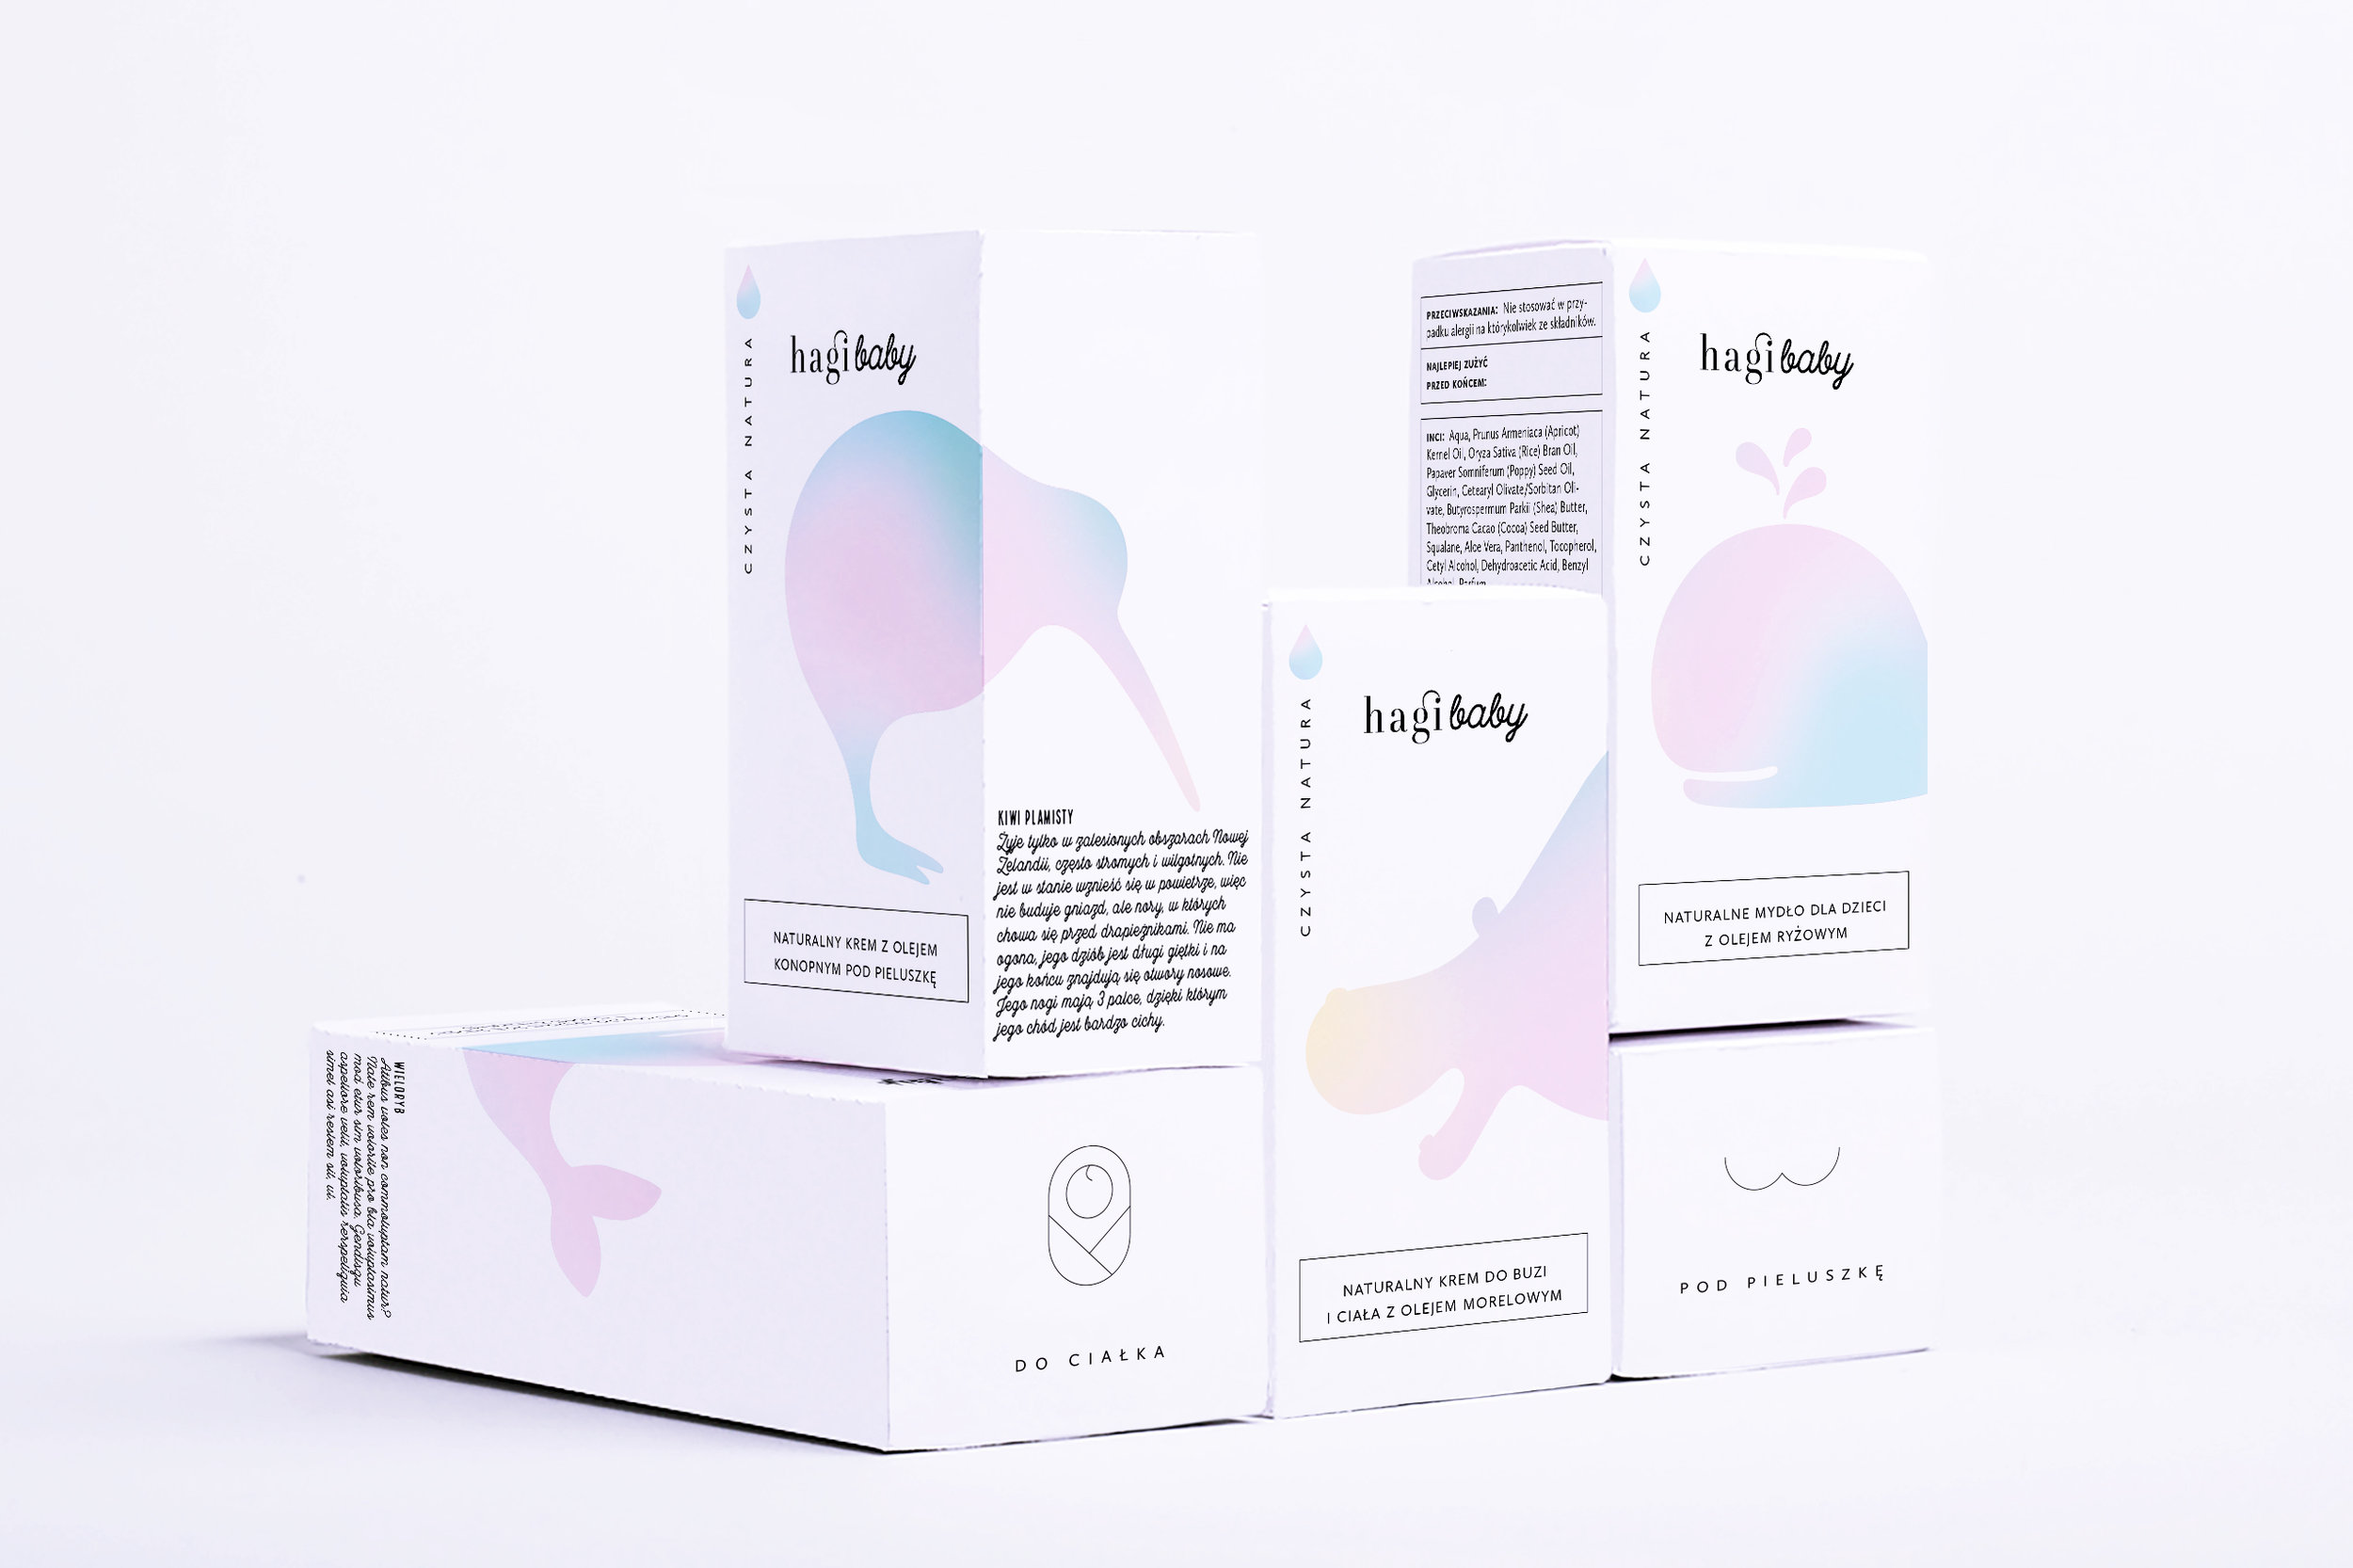 Hagi Baby’s Packaging is a Clean and Modern Take on Baby Care Products